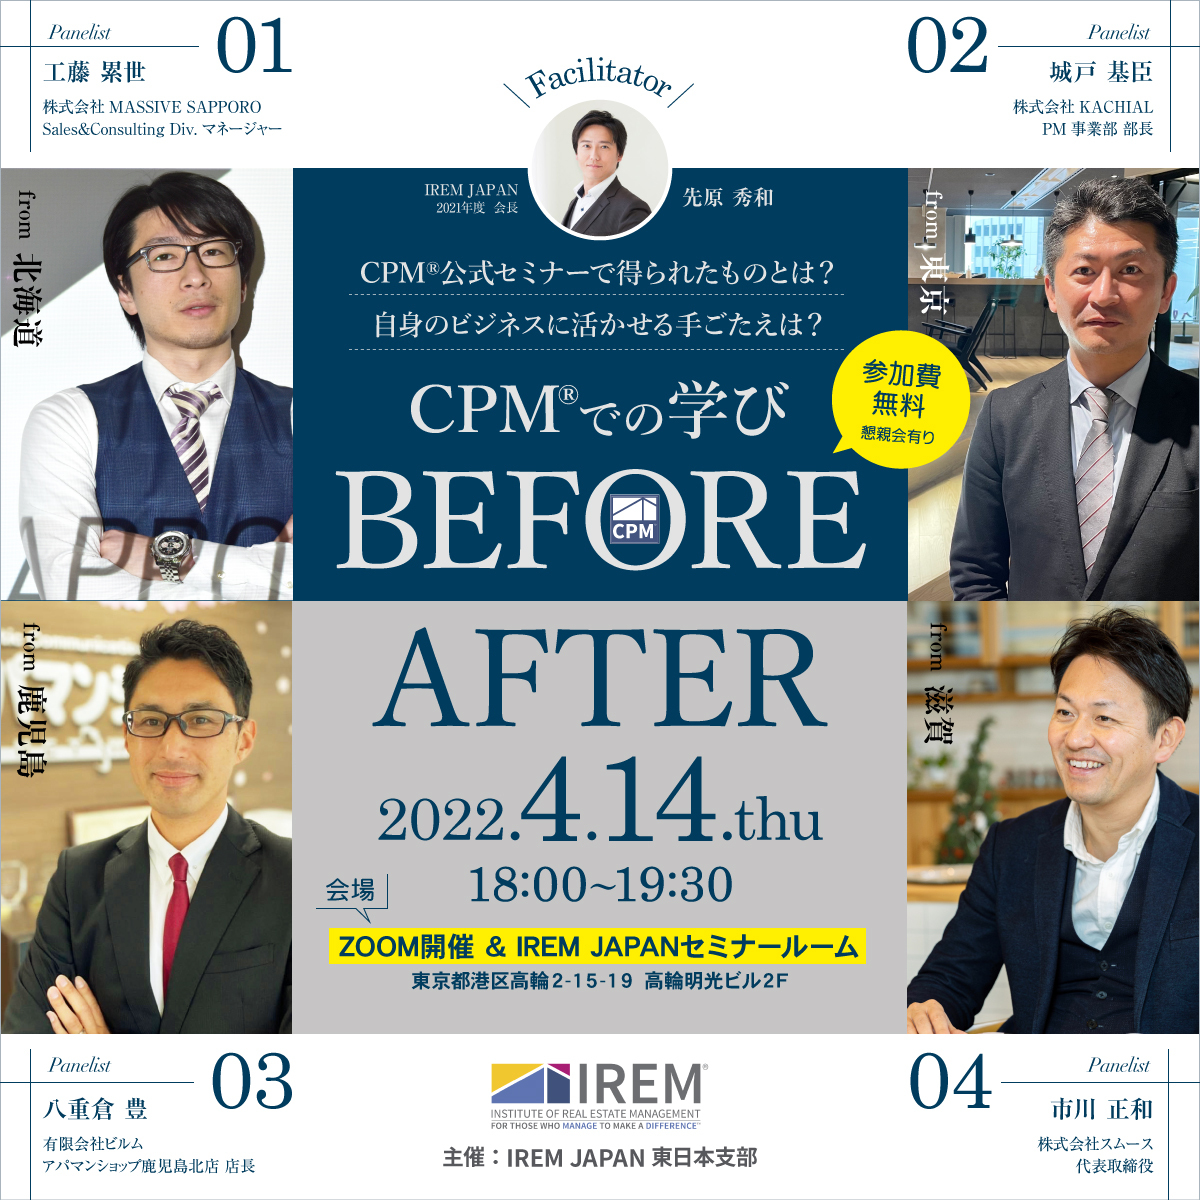 iremjapan_CPMbefore_after_A-2.jpg